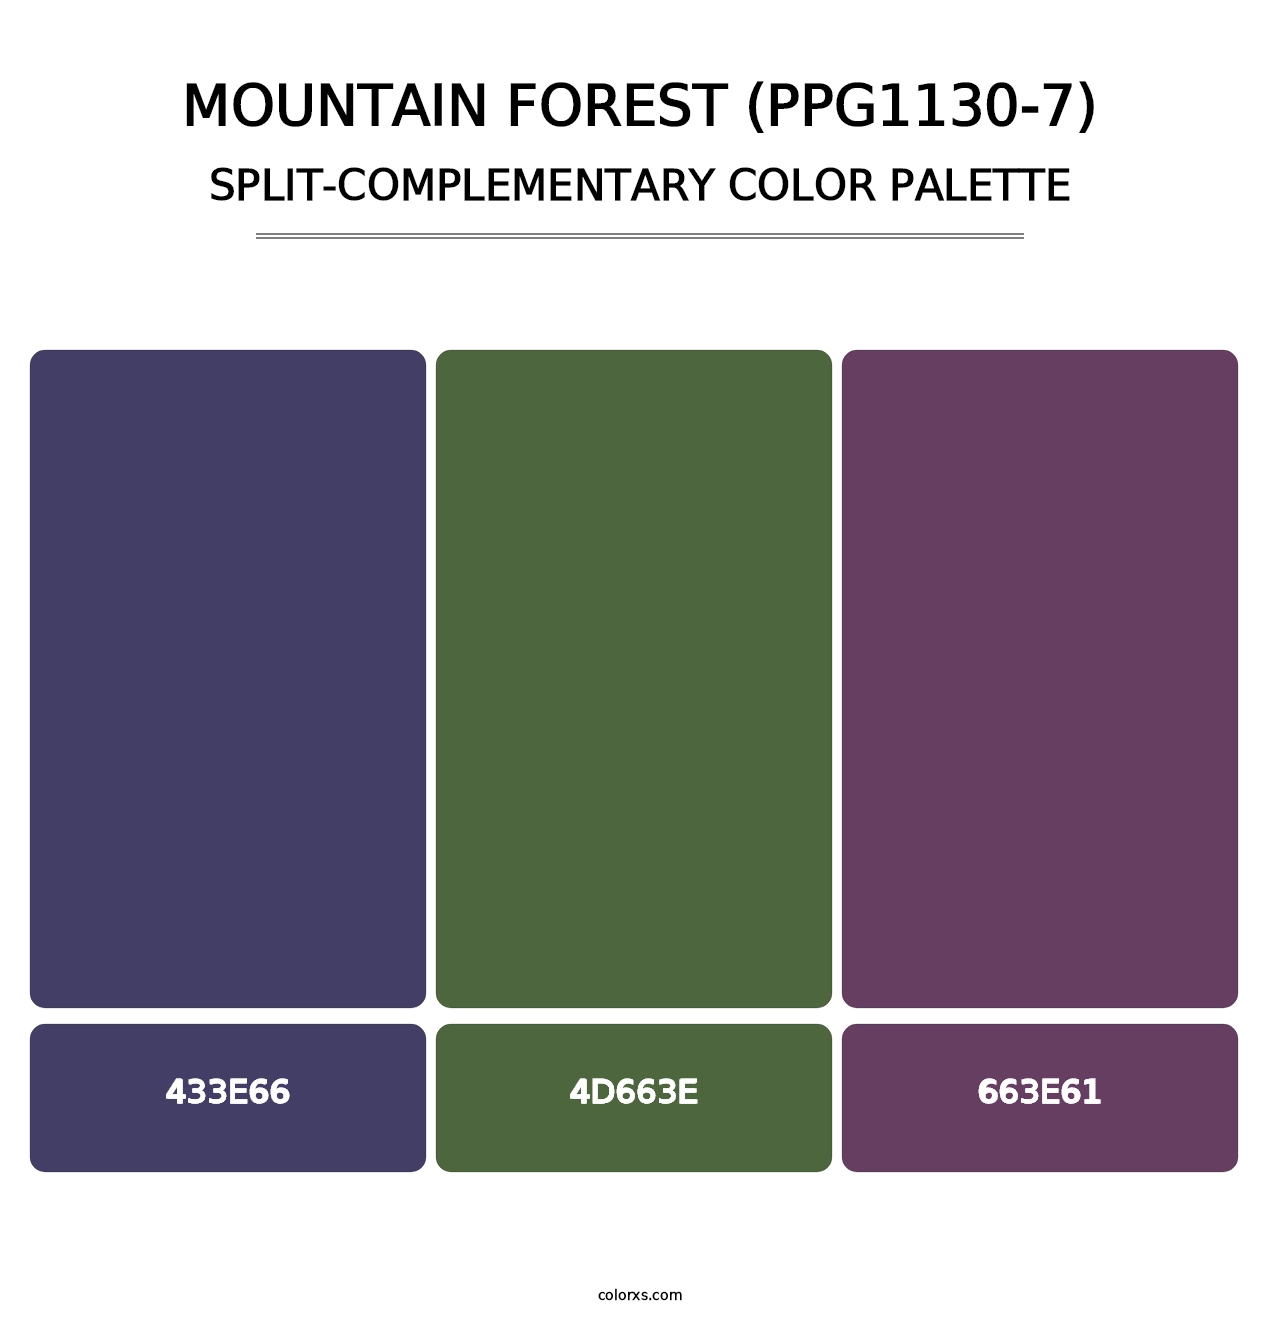 Mountain Forest (PPG1130-7) - Split-Complementary Color Palette